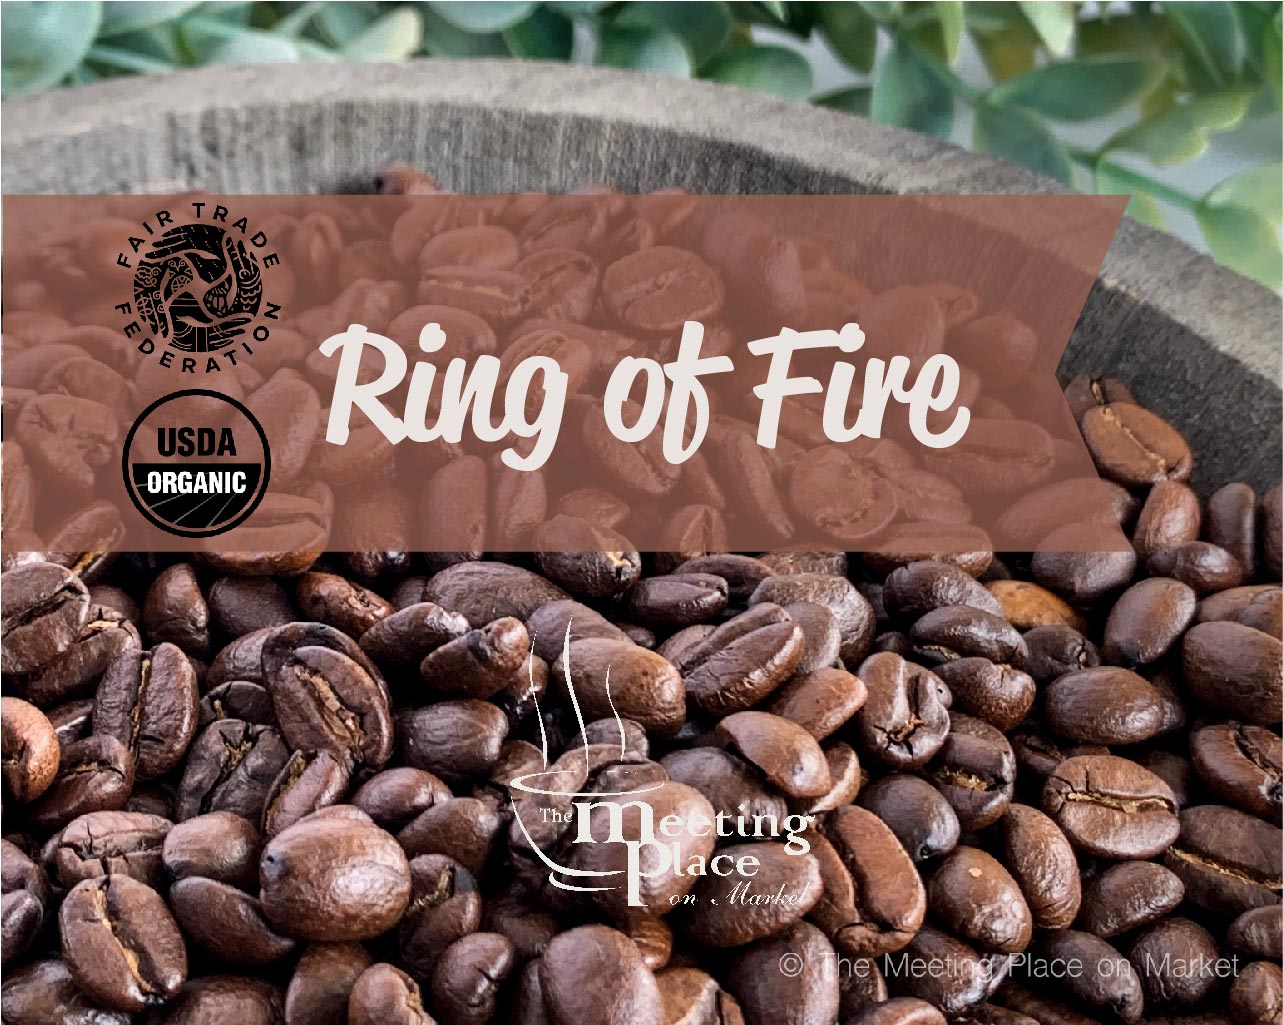 Ring of Fire Fair Trade Organic Coffee Beans / Ground Coffee Gourmet Coffee - The Meeting Place on Market